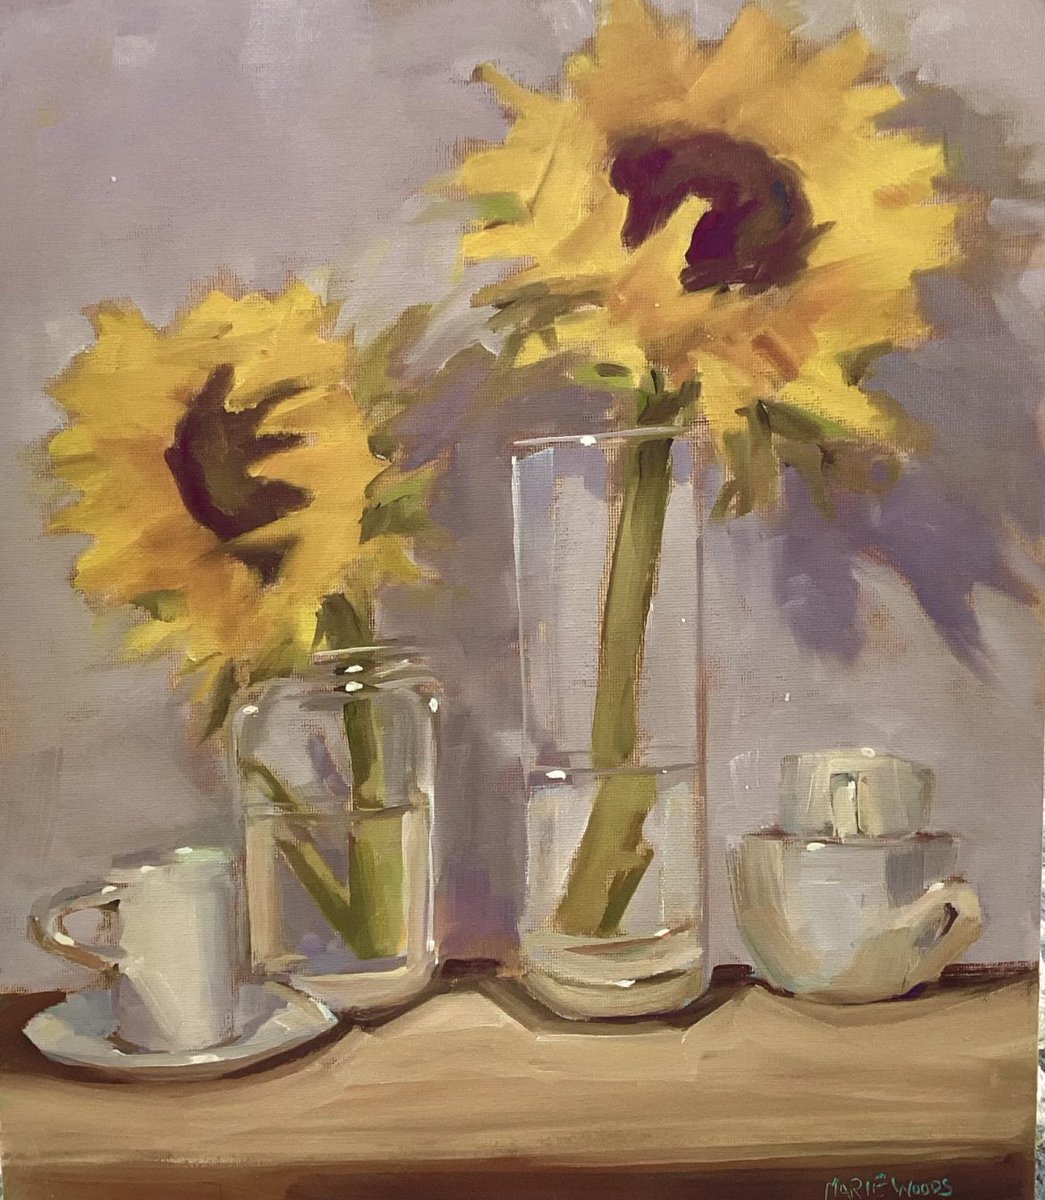 Marie Woods Sunflowers, Sunny Side Up Oil Painting 12” x 14” artwork500.co.uk/product/sunflo… 📩 PM For Further Enquiries 🚚 Free Postage Throughout the UK 📲 Klarna, Clearpay Options Available #belfastblogger #belfast #northernireland #belfastcity #ireland #niblogger #visitbelfast